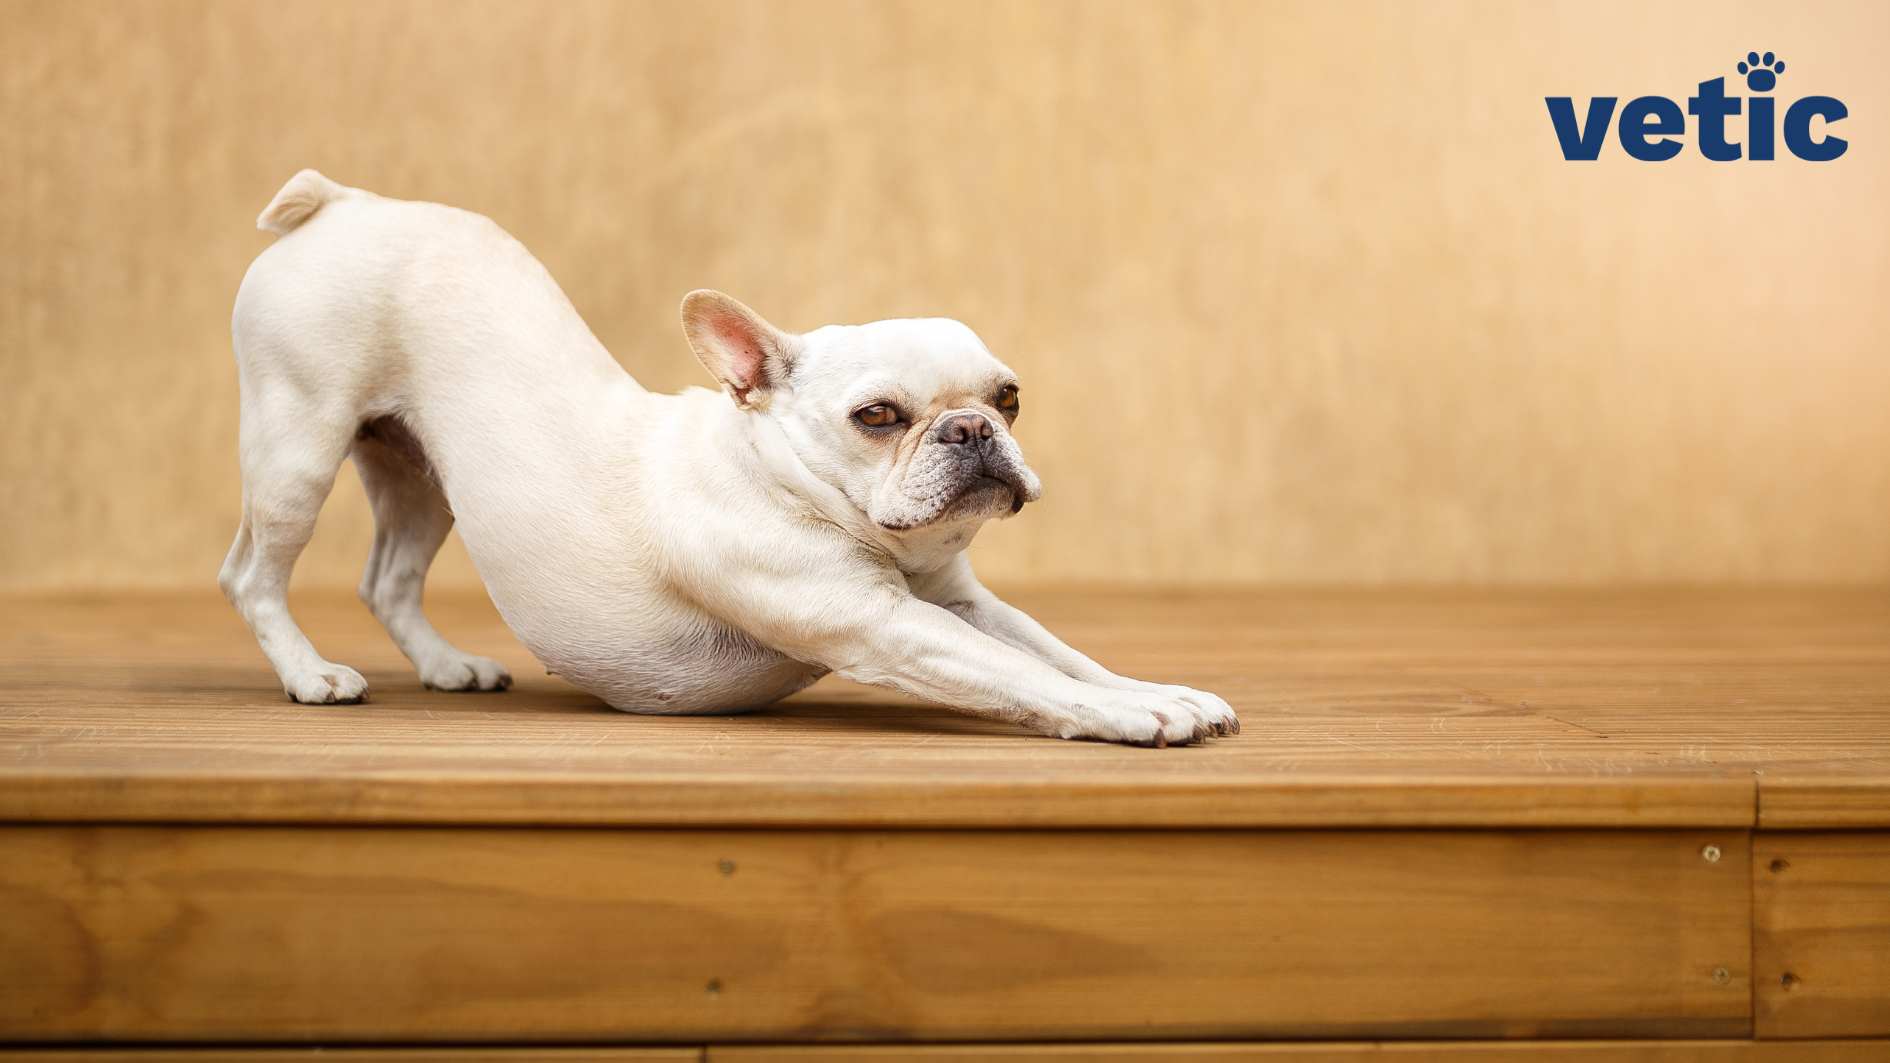 An adult fawn French Bulldog stretching out their front legs while looking at the camera. the dog has almond shaped brown eyes.